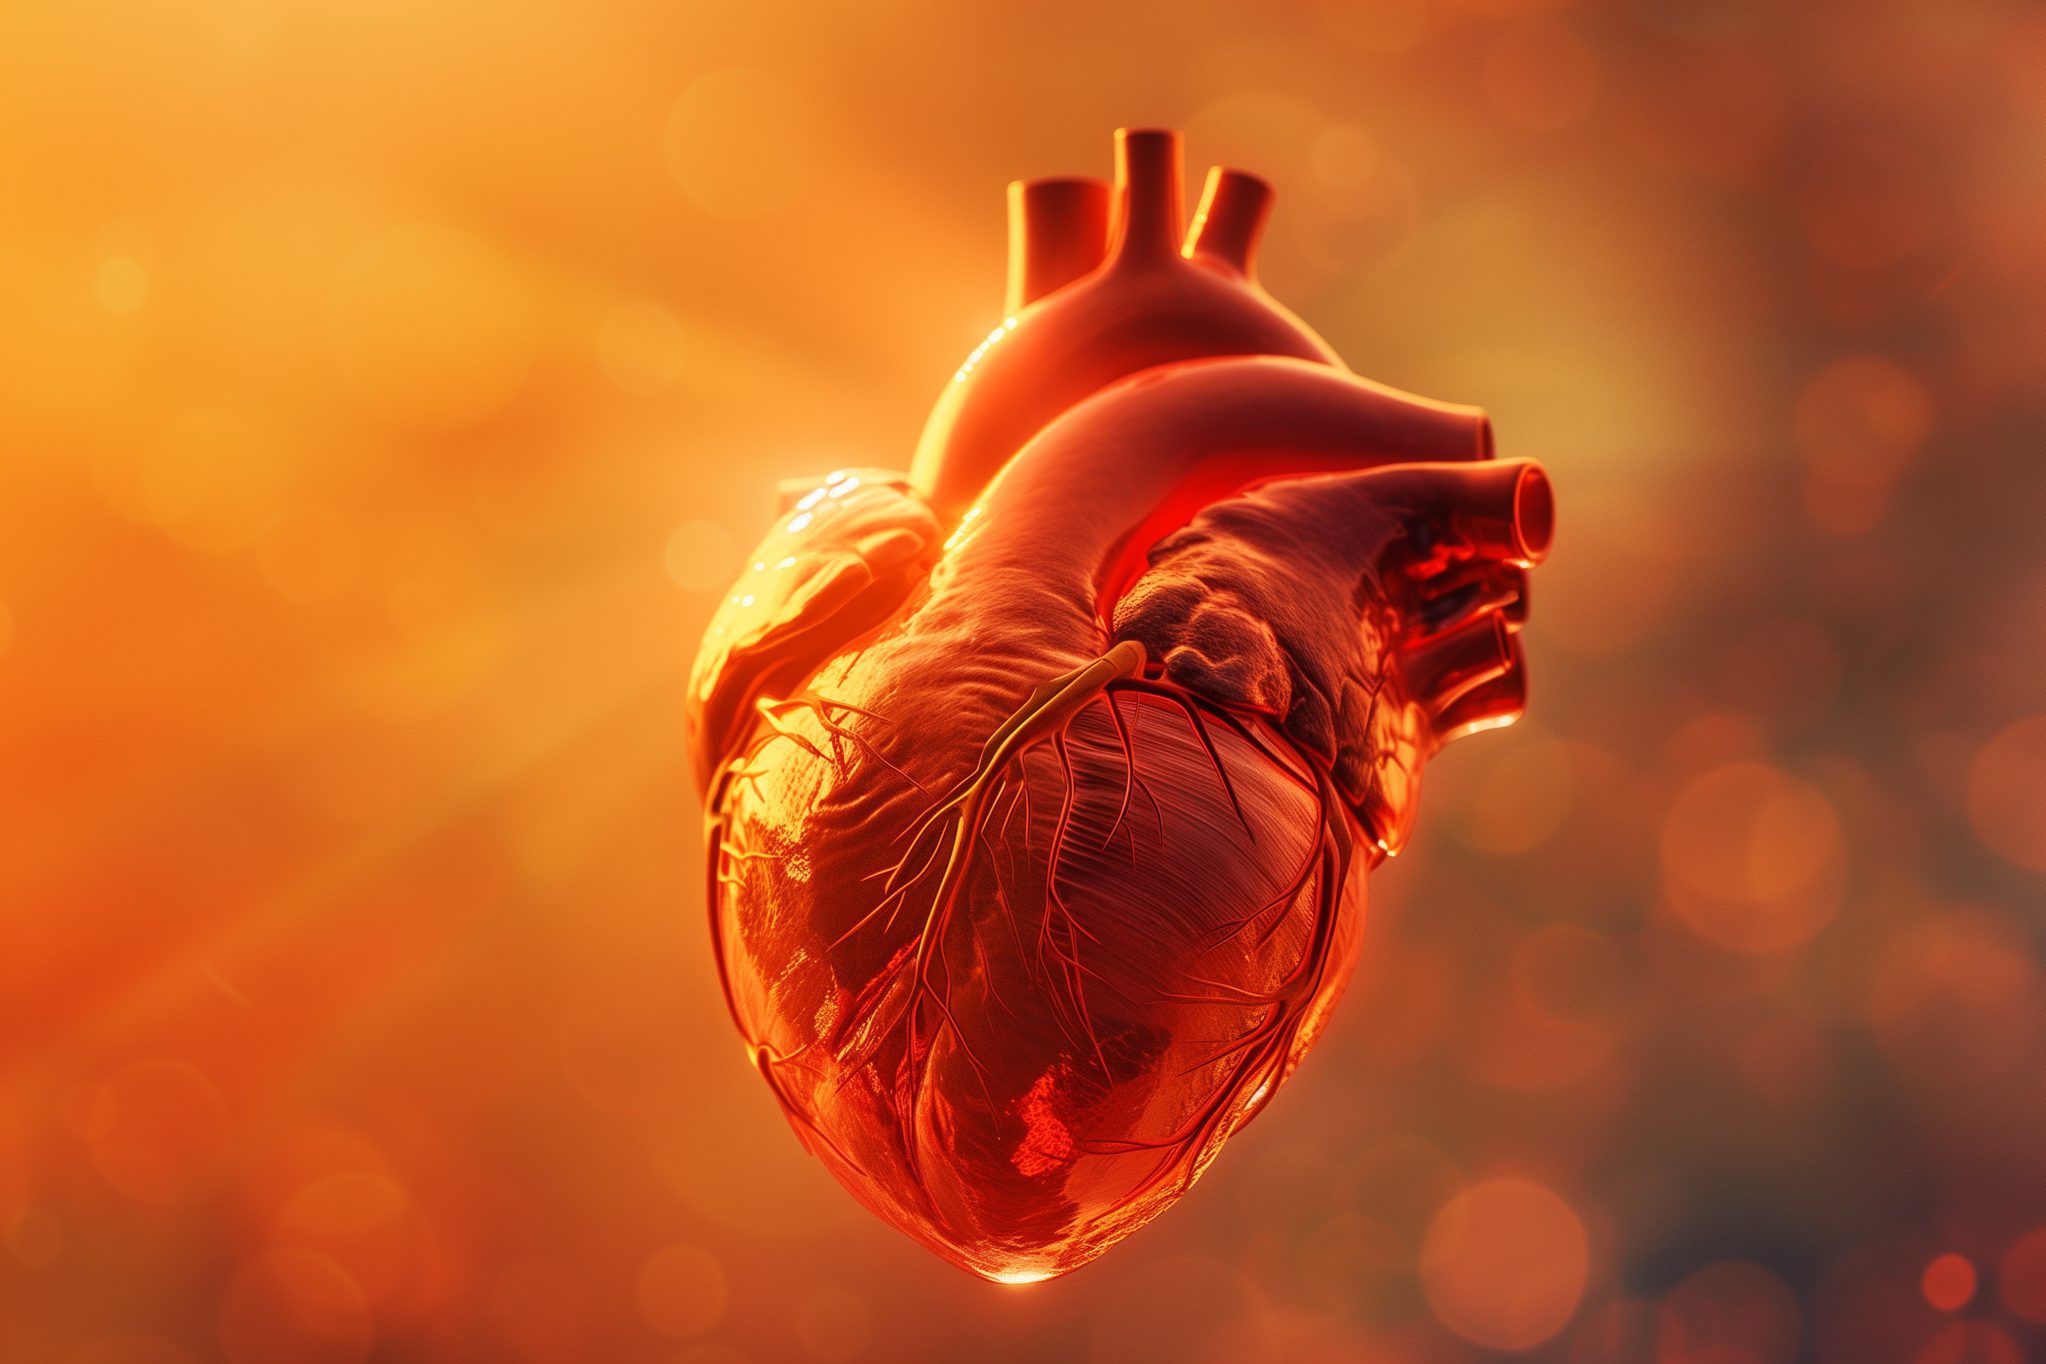 How Does Sleep Strengthen Your Heart?